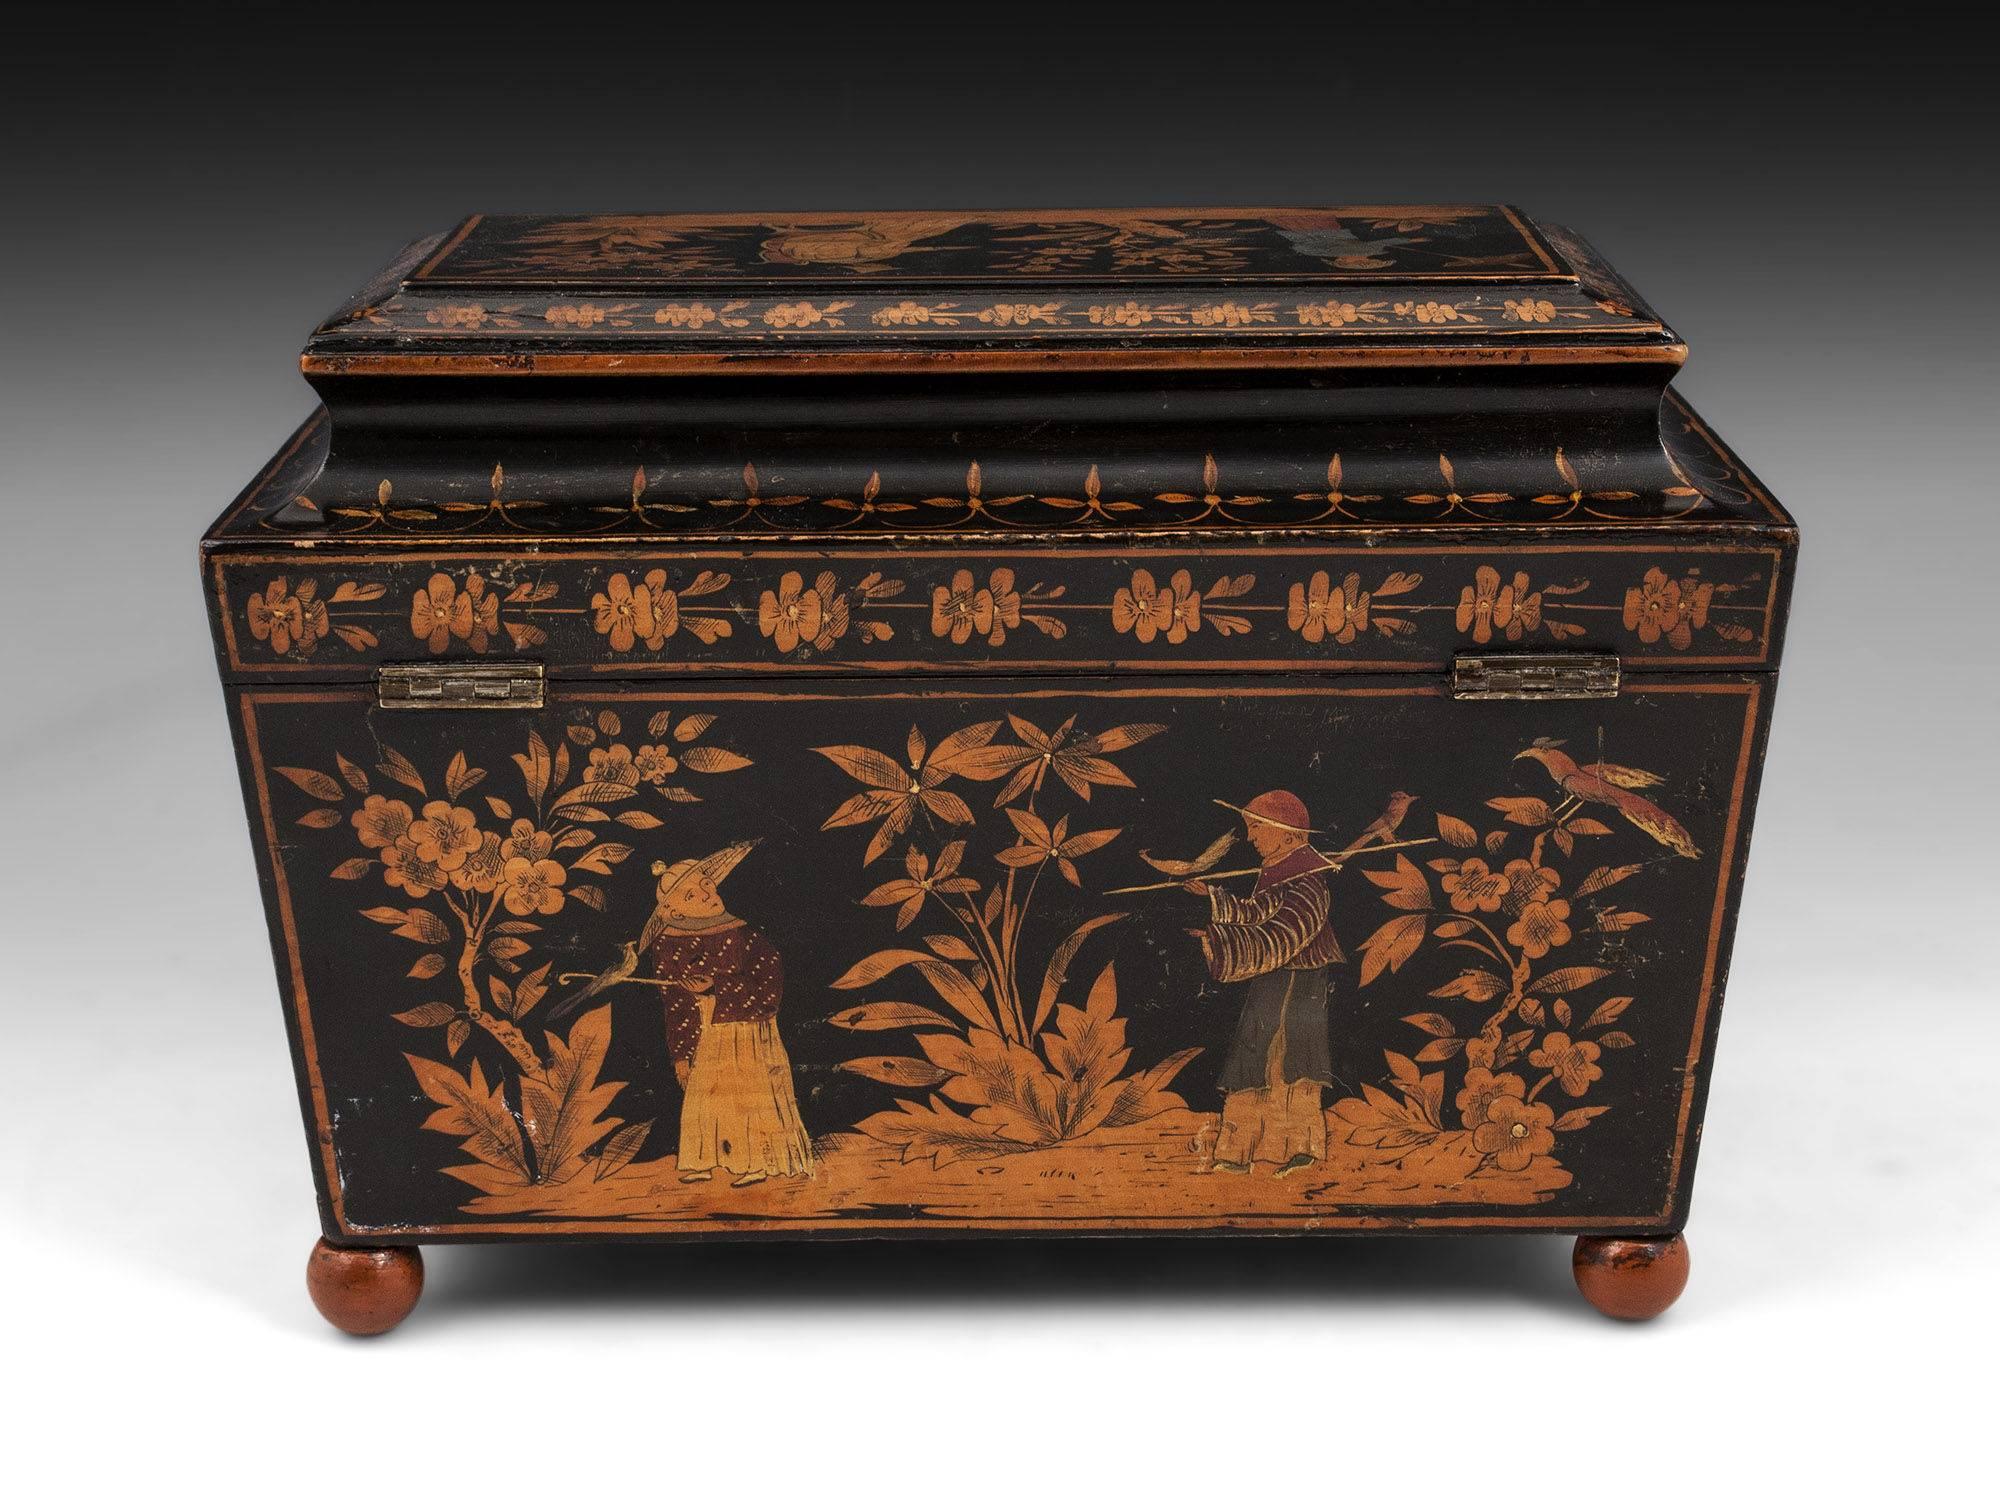 Early 19th Century Superb Regency Painted Penwork and Chinoiserie Sarcophagus Shaped Tea Caddy